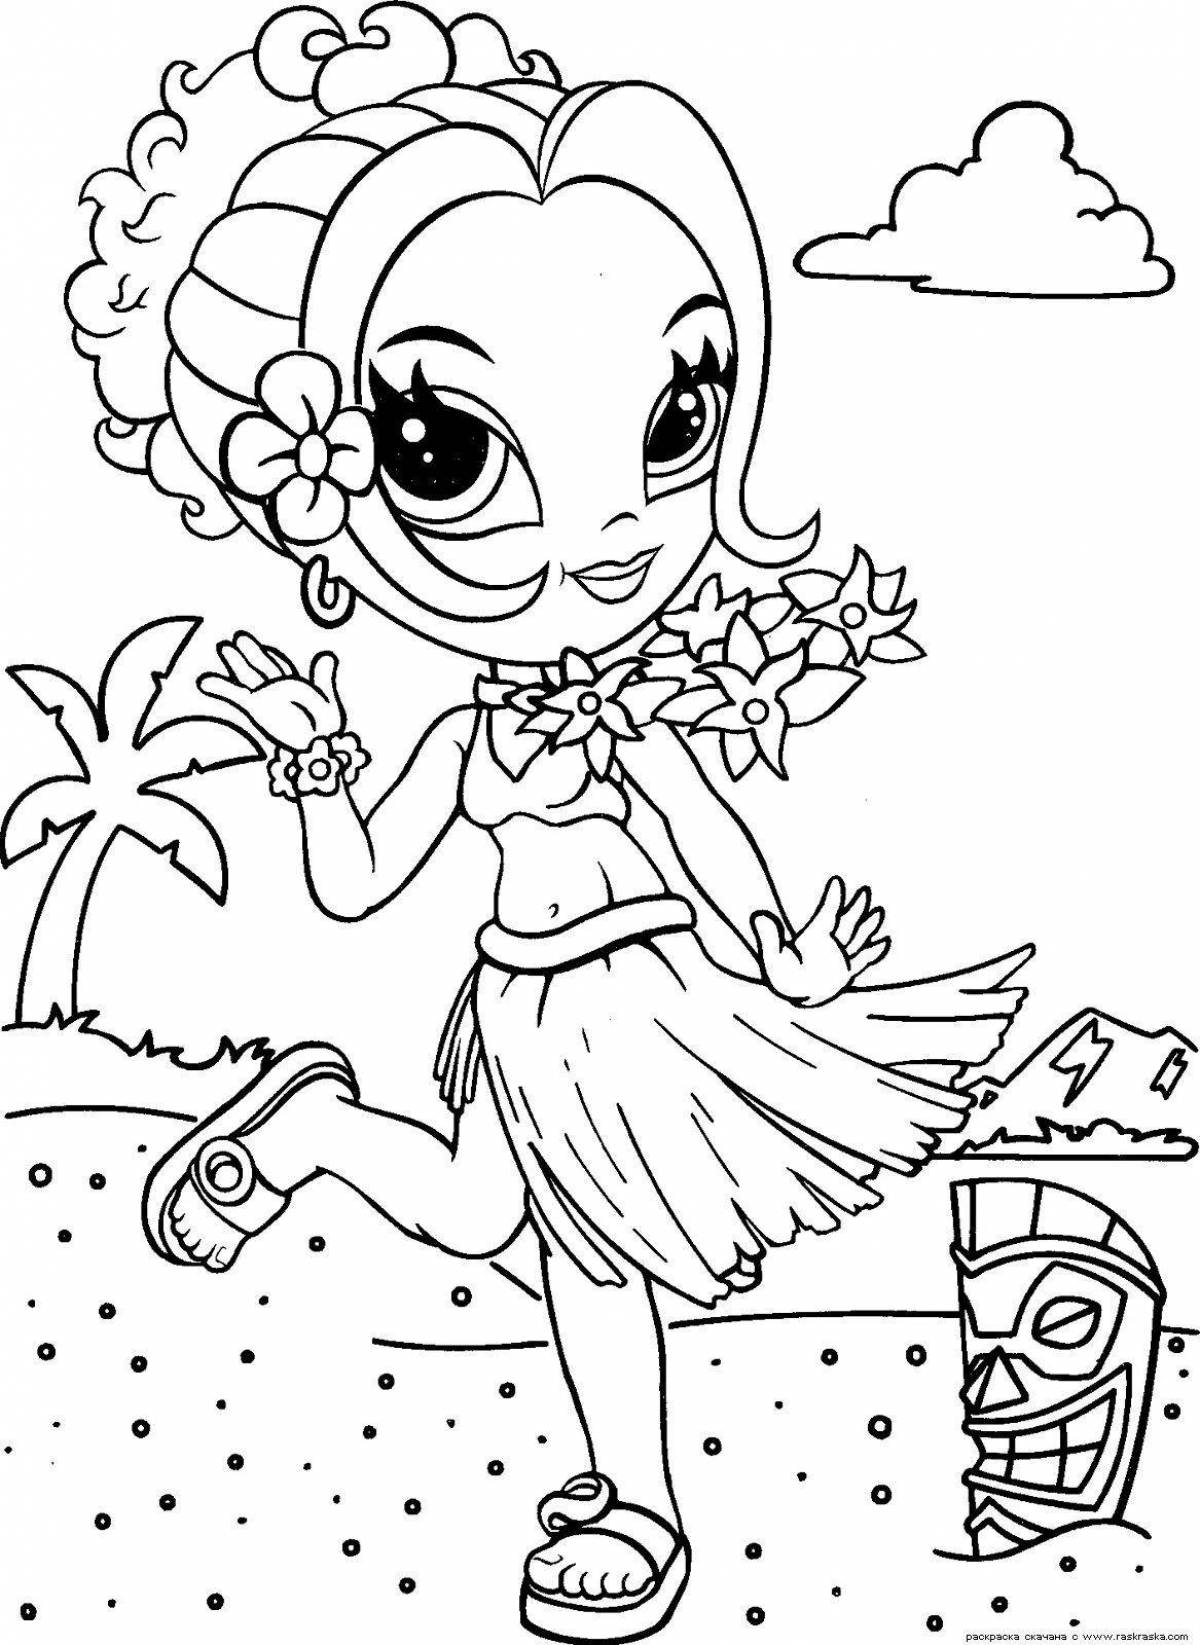 Printable colorful mystery coloring book